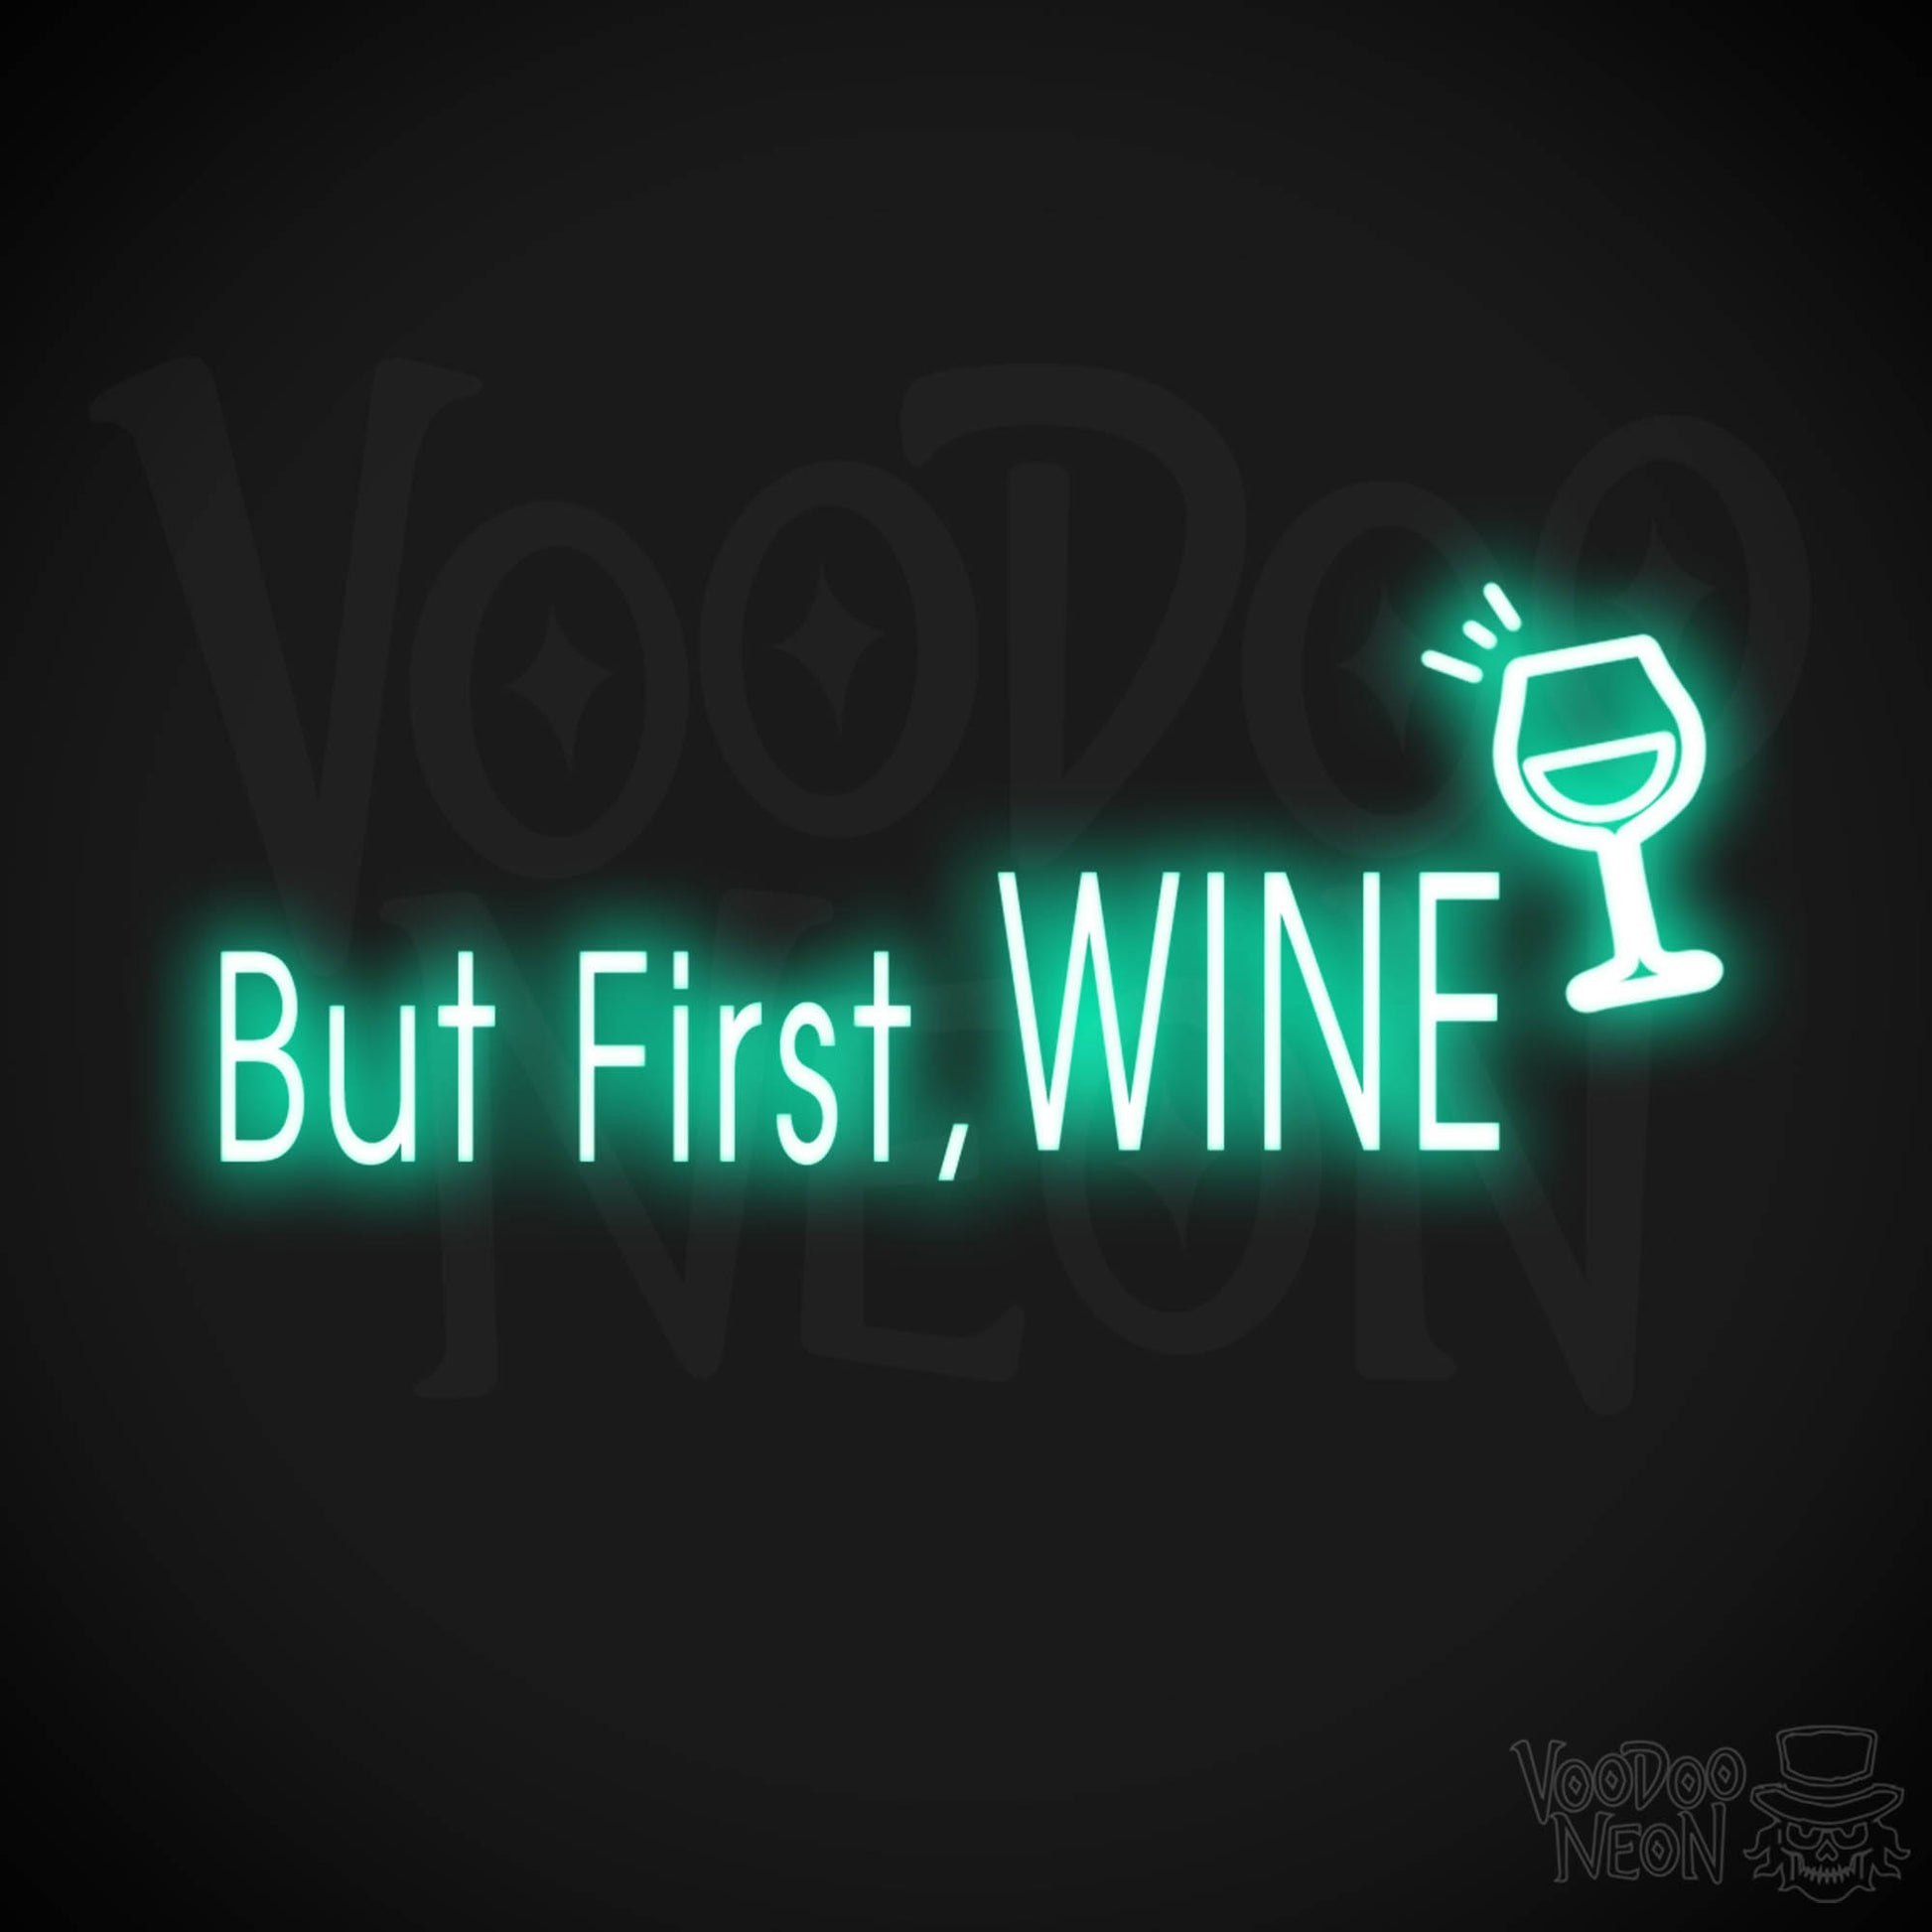 But First Wine Neon Sign - But First Wine Sign - Neon Wine Wall Art - Color Light Green